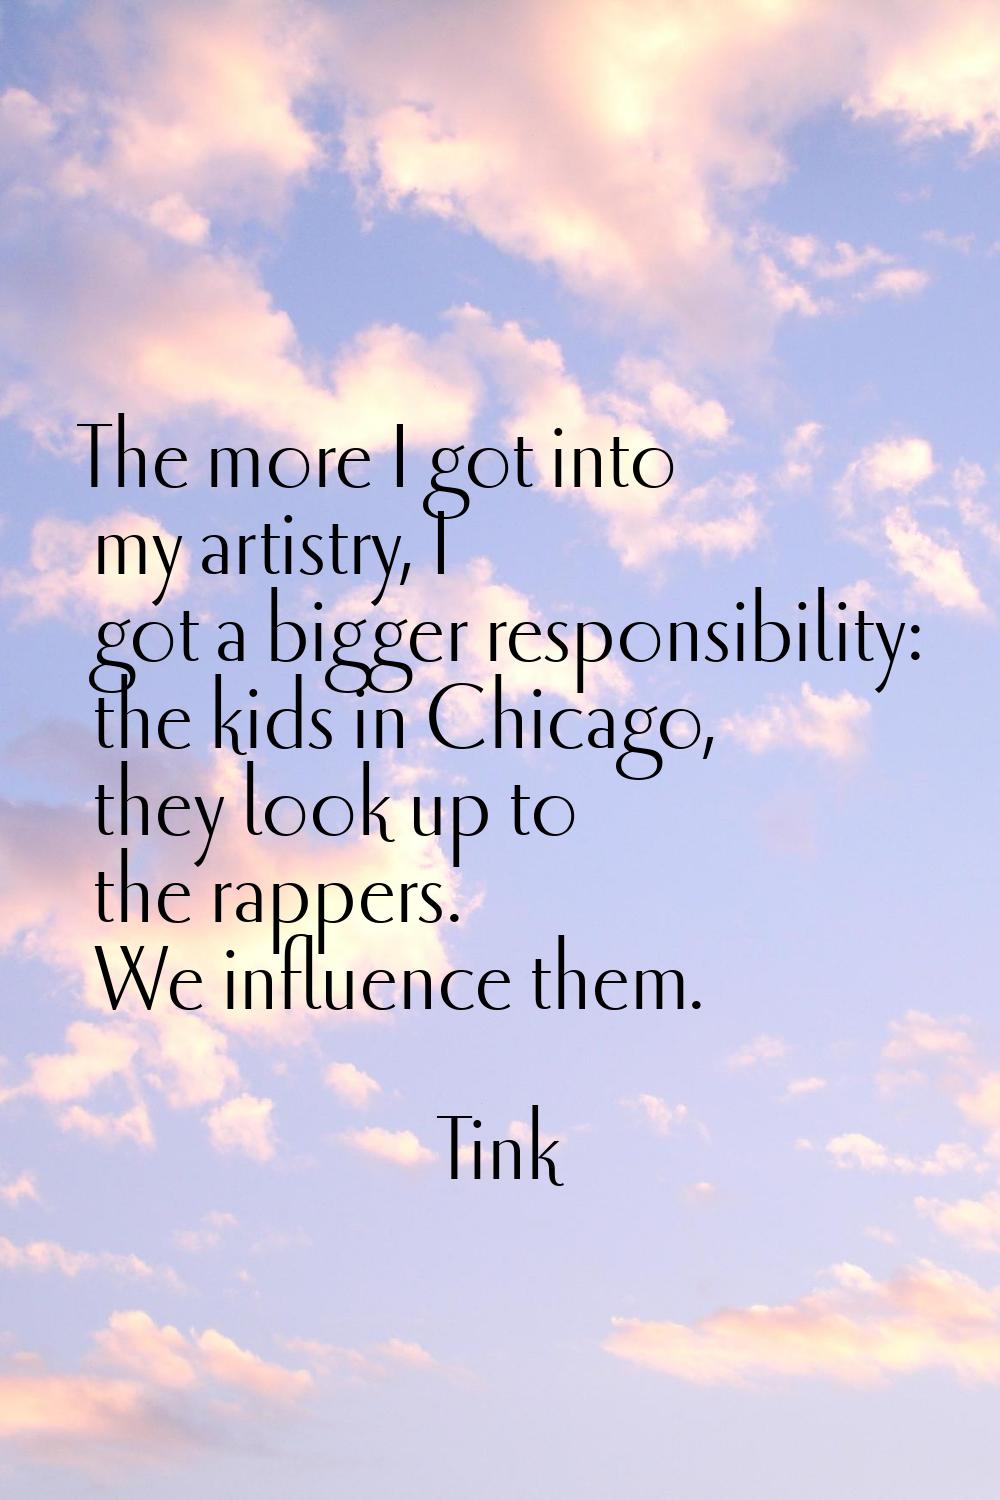 The more I got into my artistry, I got a bigger responsibility: the kids in Chicago, they look up t